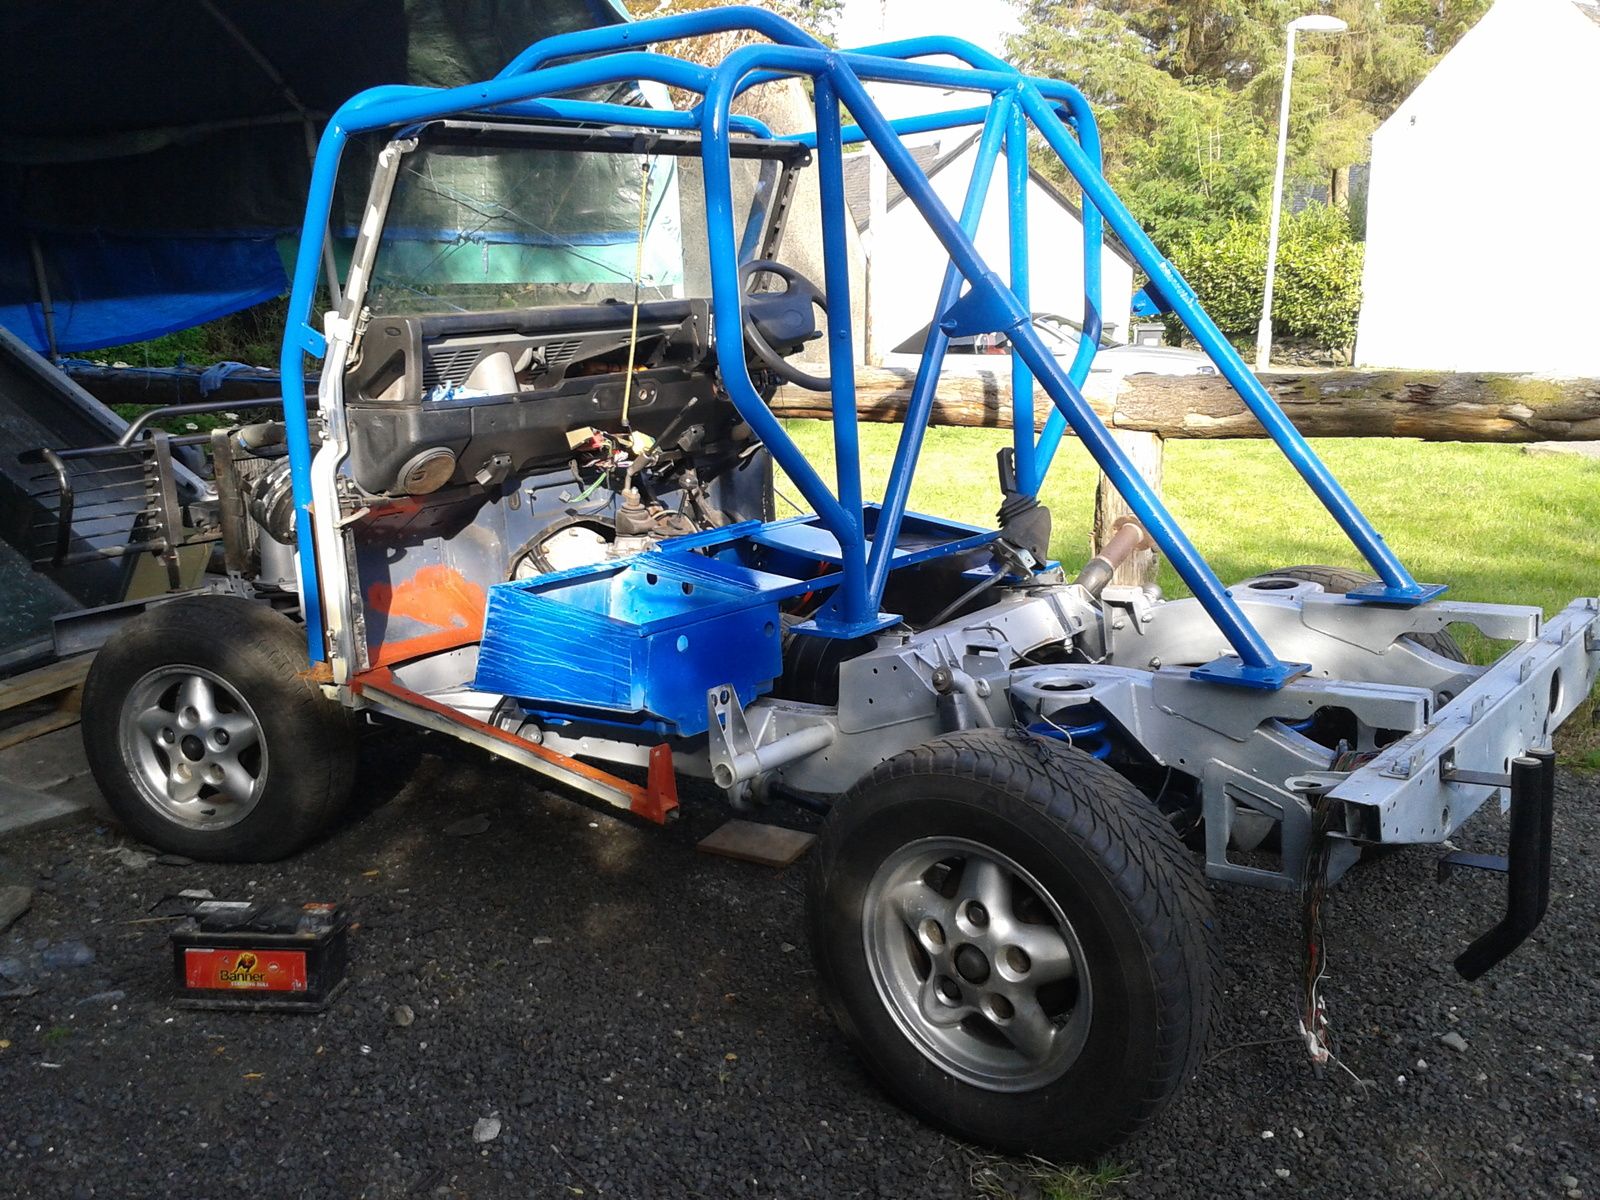 90 v Series roll cage | LandyZone - Land Rover Forum